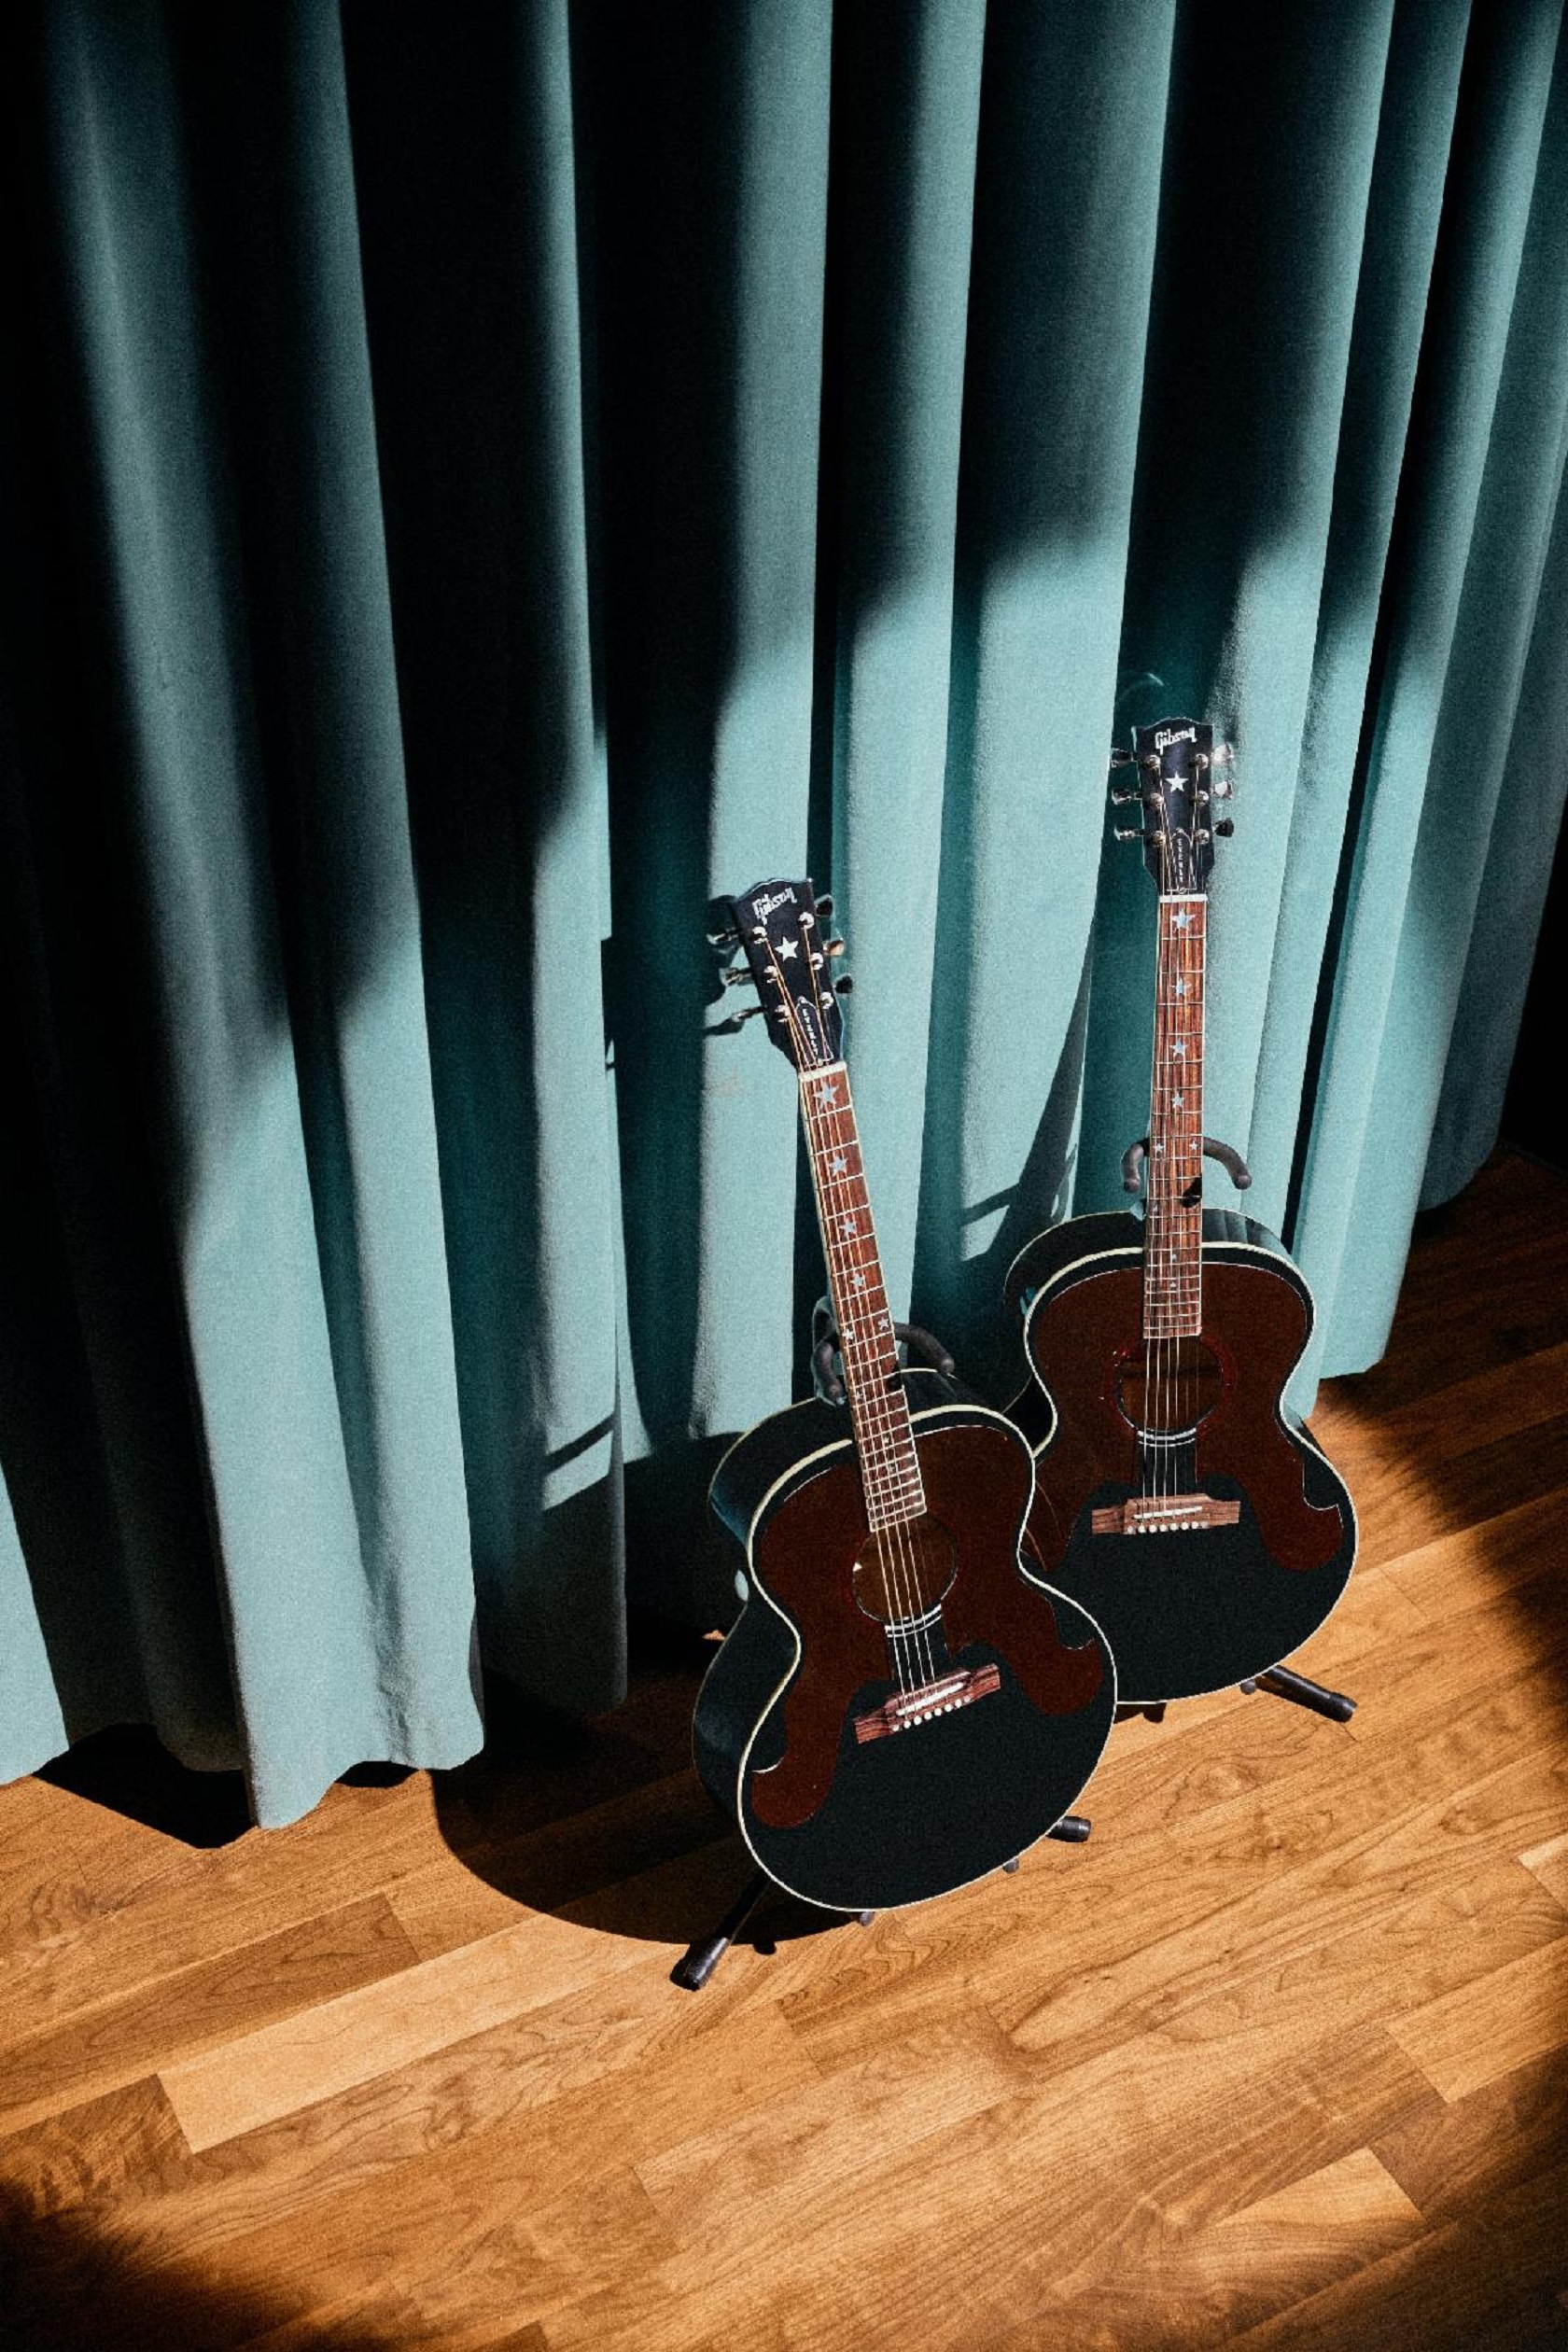 The Gibson Everly Brothers J-180 Returns, In the hands of The Everly Brothers, These Guitars Influenced Generations of Musicians and World-Renowned Artists